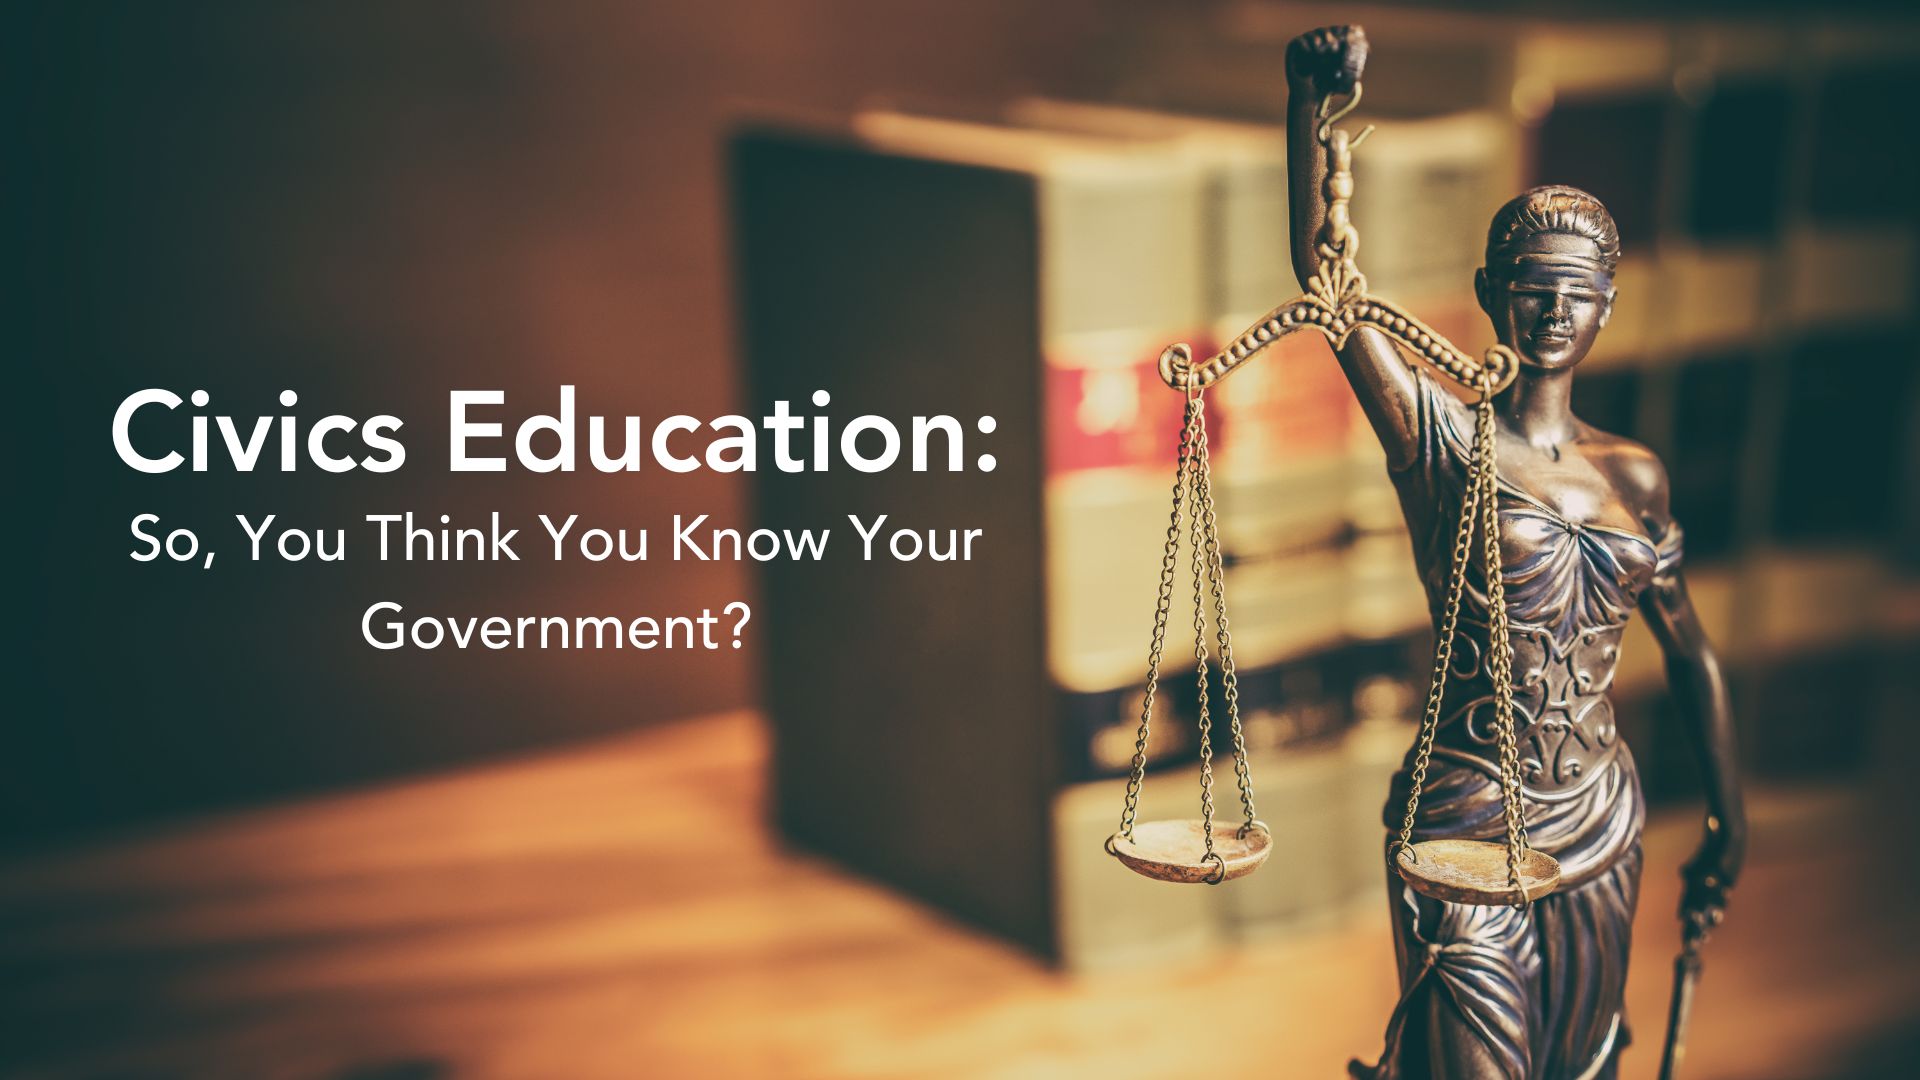 Civics Education: So, You Think You Know Your Government?